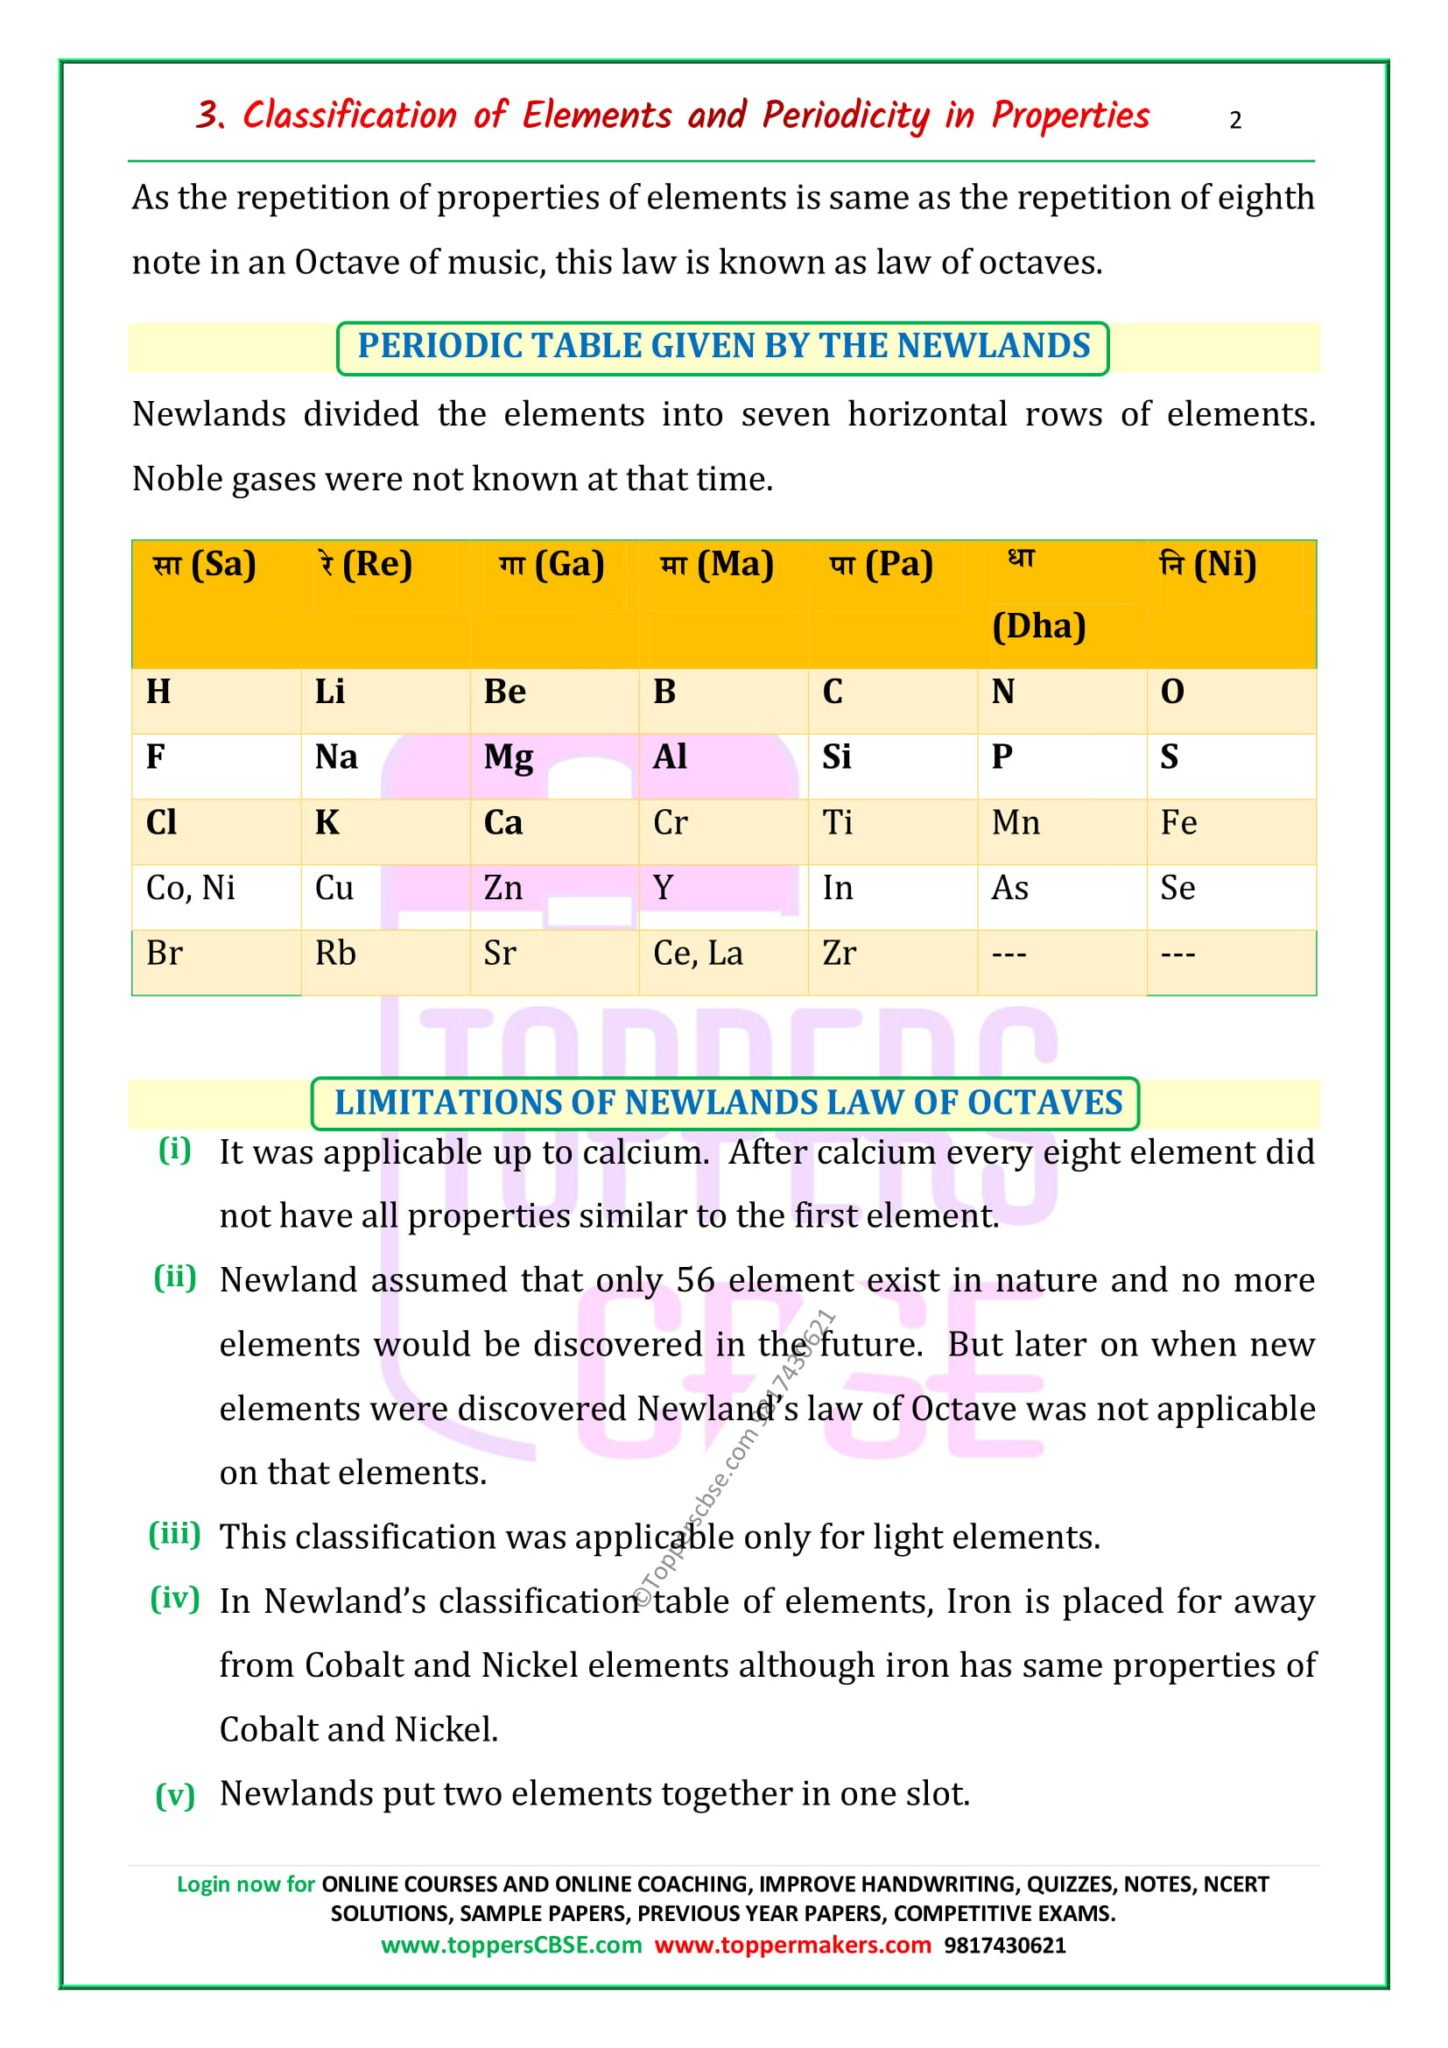 class 11 chemistry notes